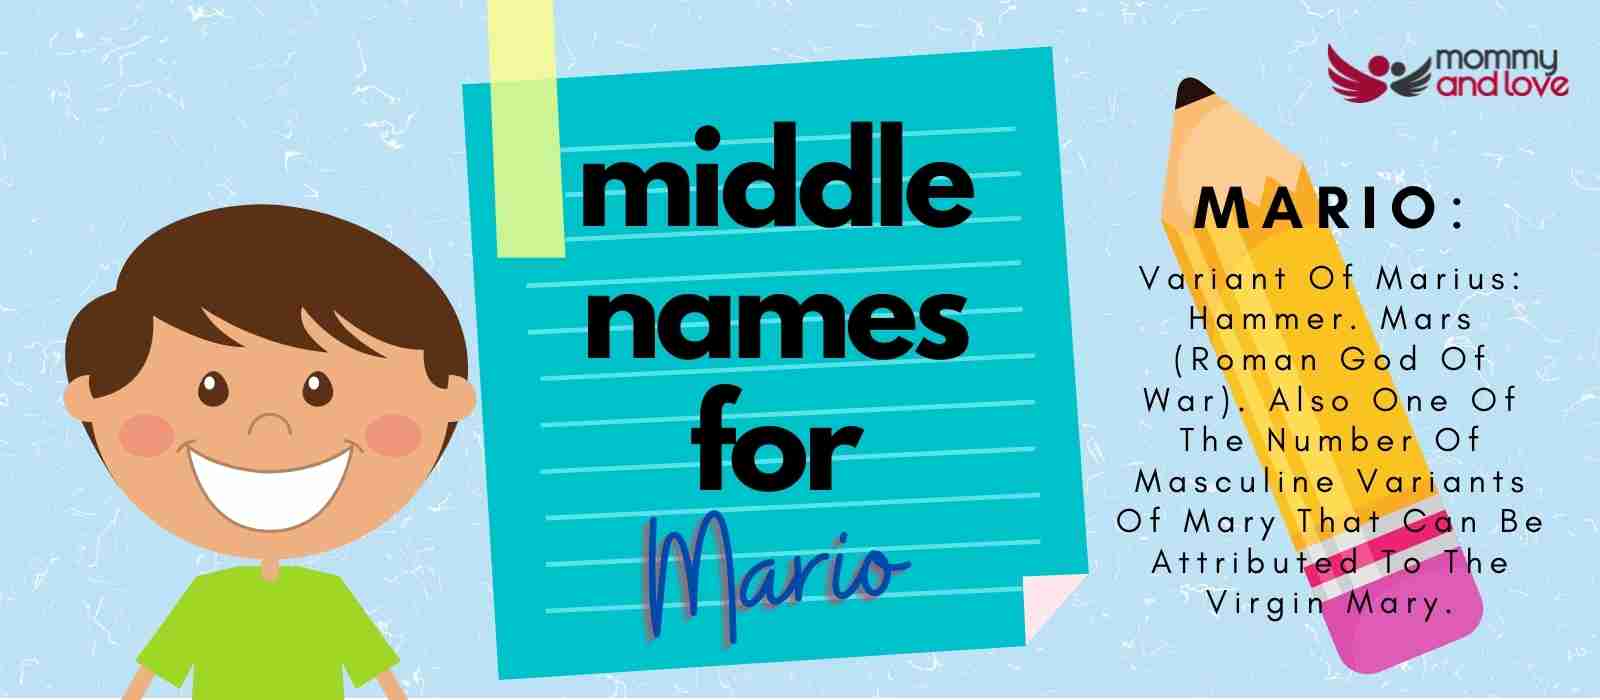 Middle Names for Mario